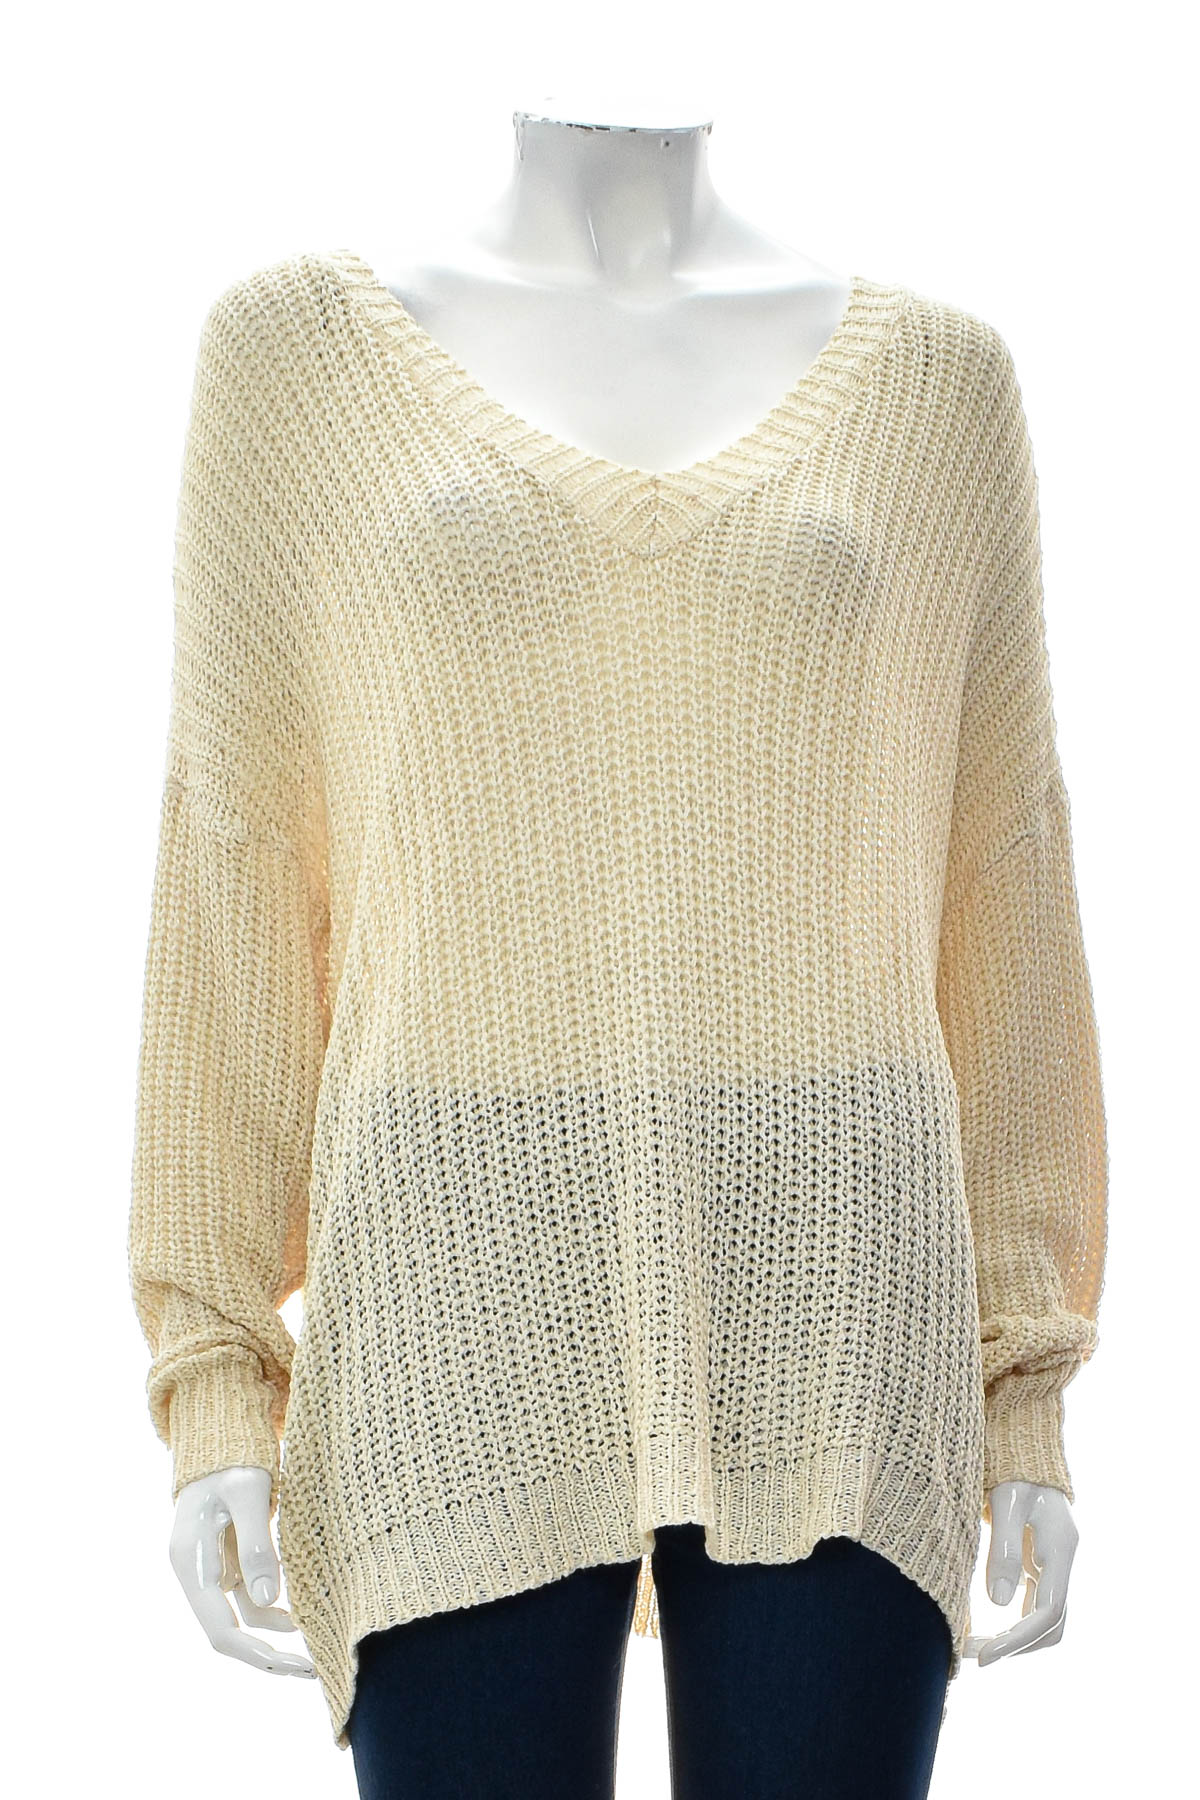 Women's sweater - Most Collection - 0